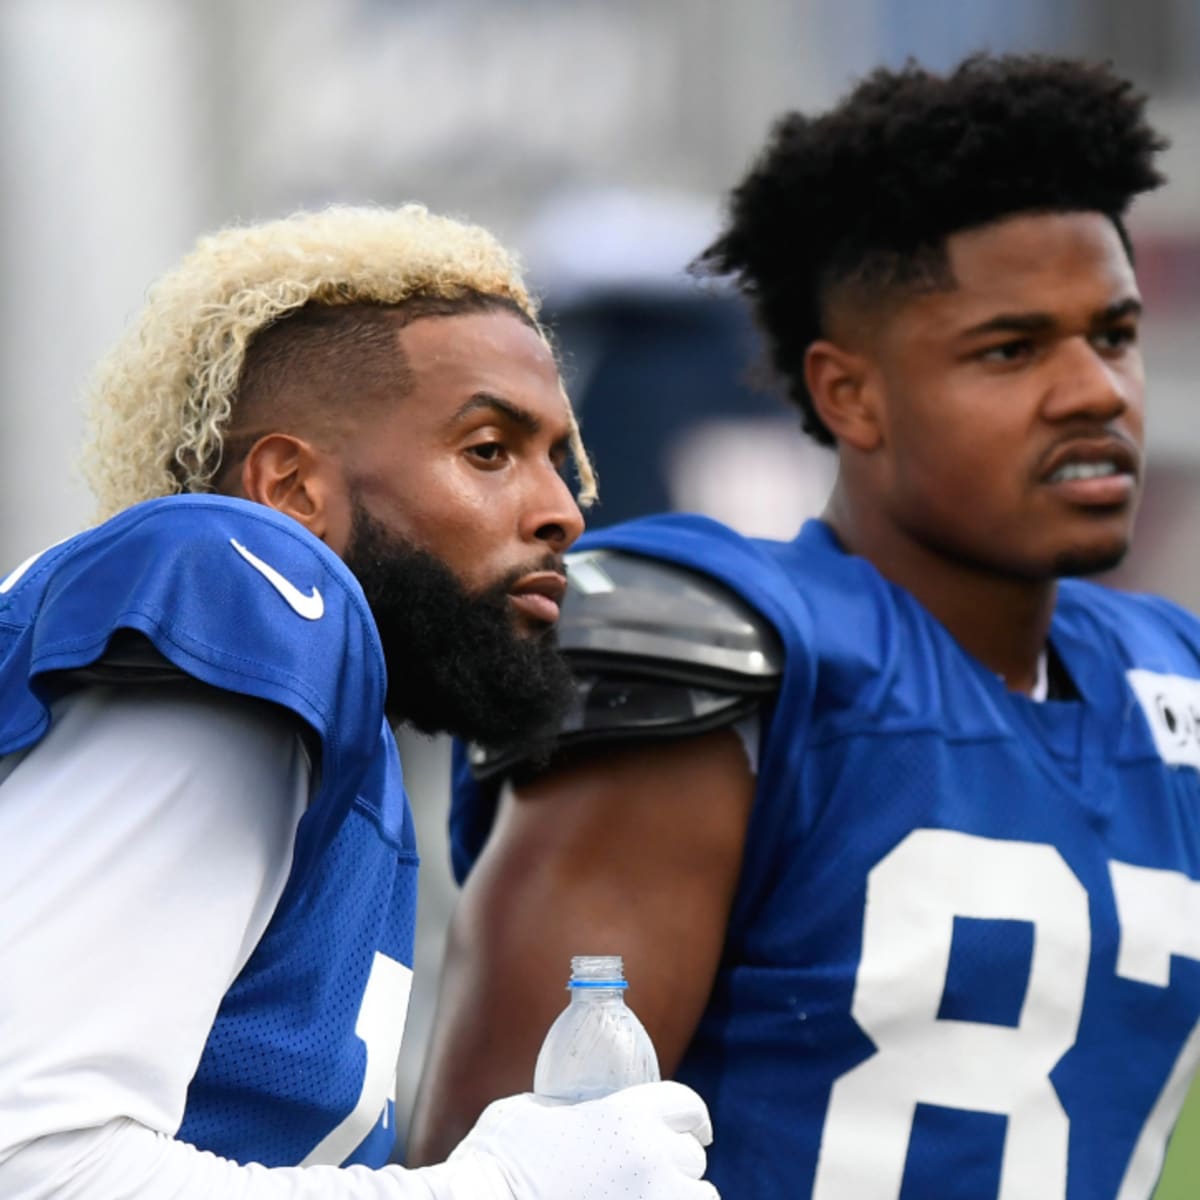 Free agent Odell Beckham Jr. has 'good visit' with Giants, Brian Daboll  says